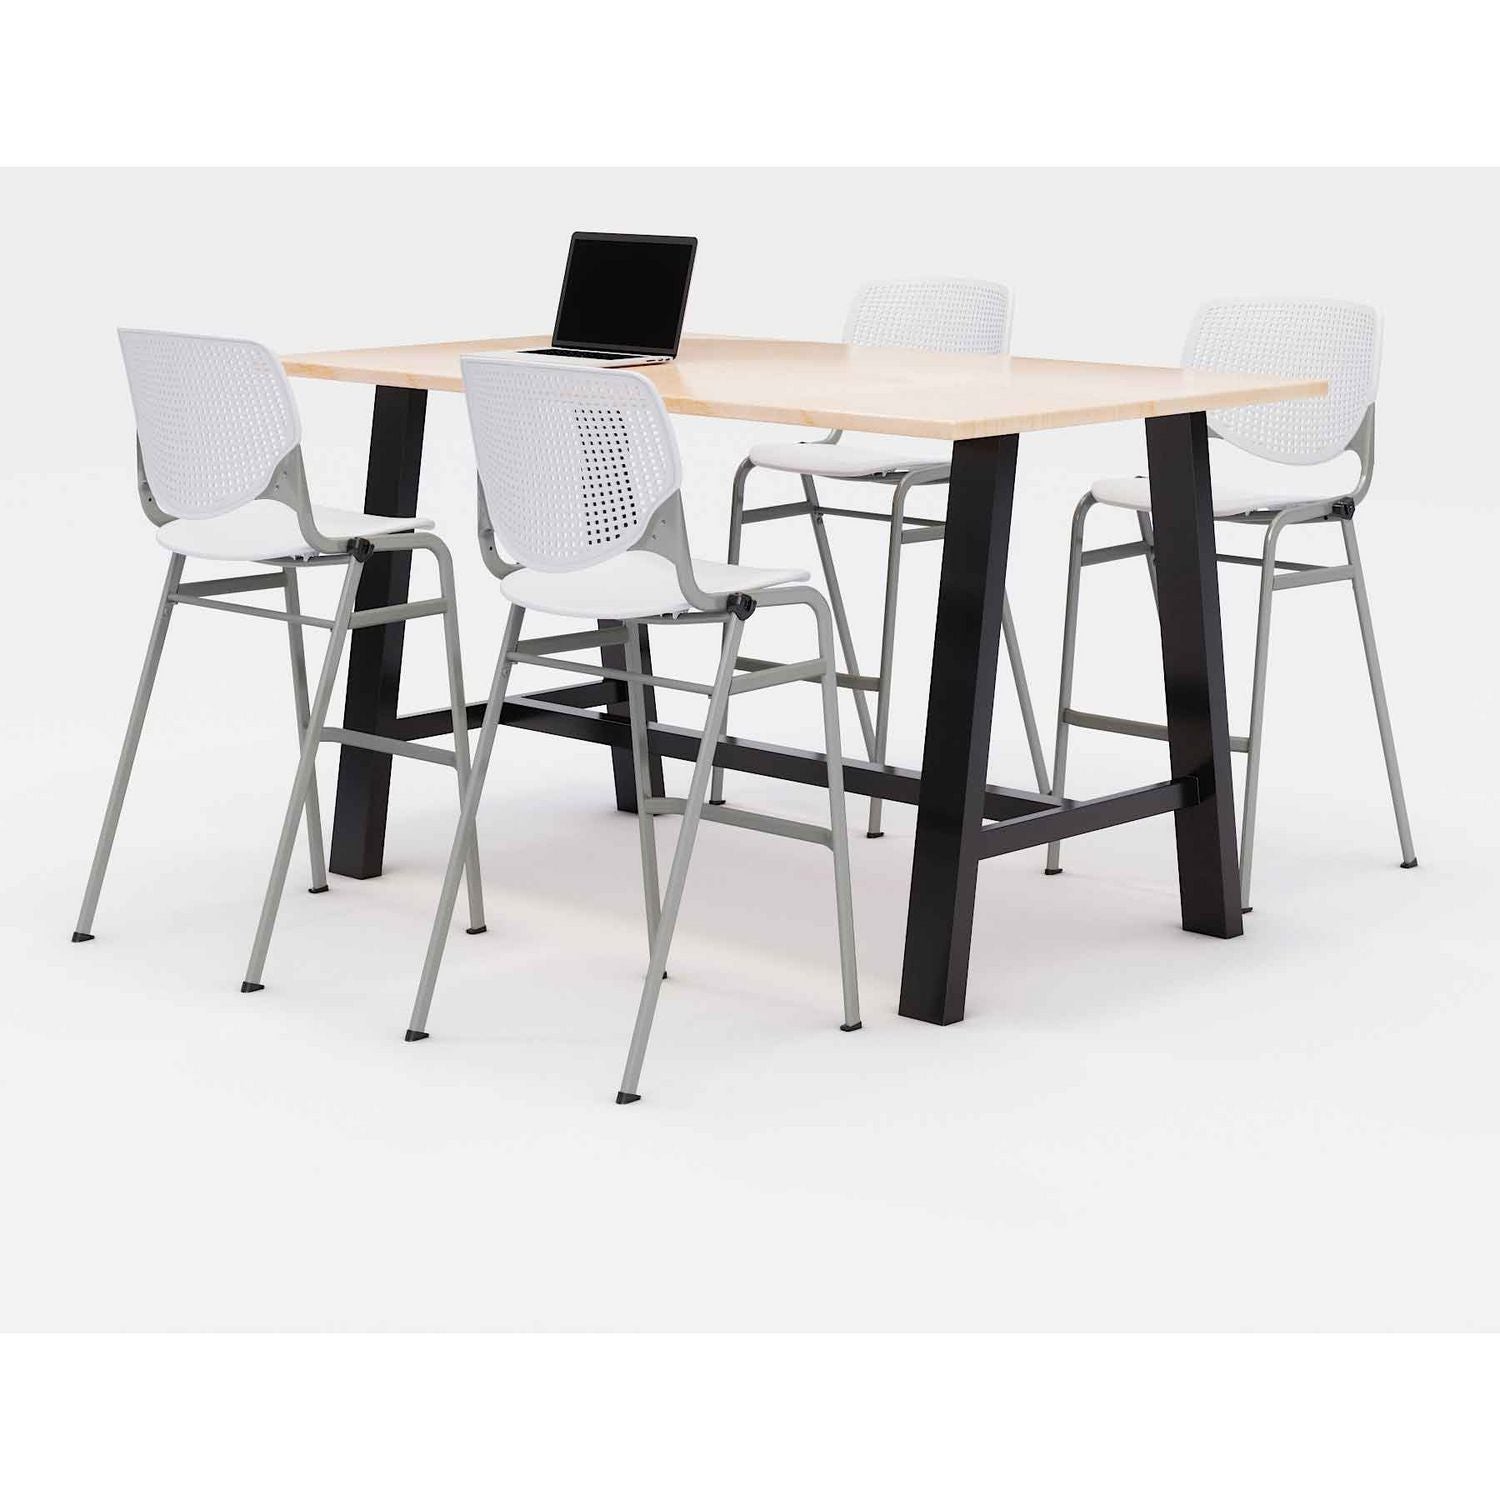 midtown-bistro-dining-table-with-four-white-kool-barstools-36-x-72-x-41-kensington-maple-ships-in-4-6-business-days_kfi840031900753 - 1